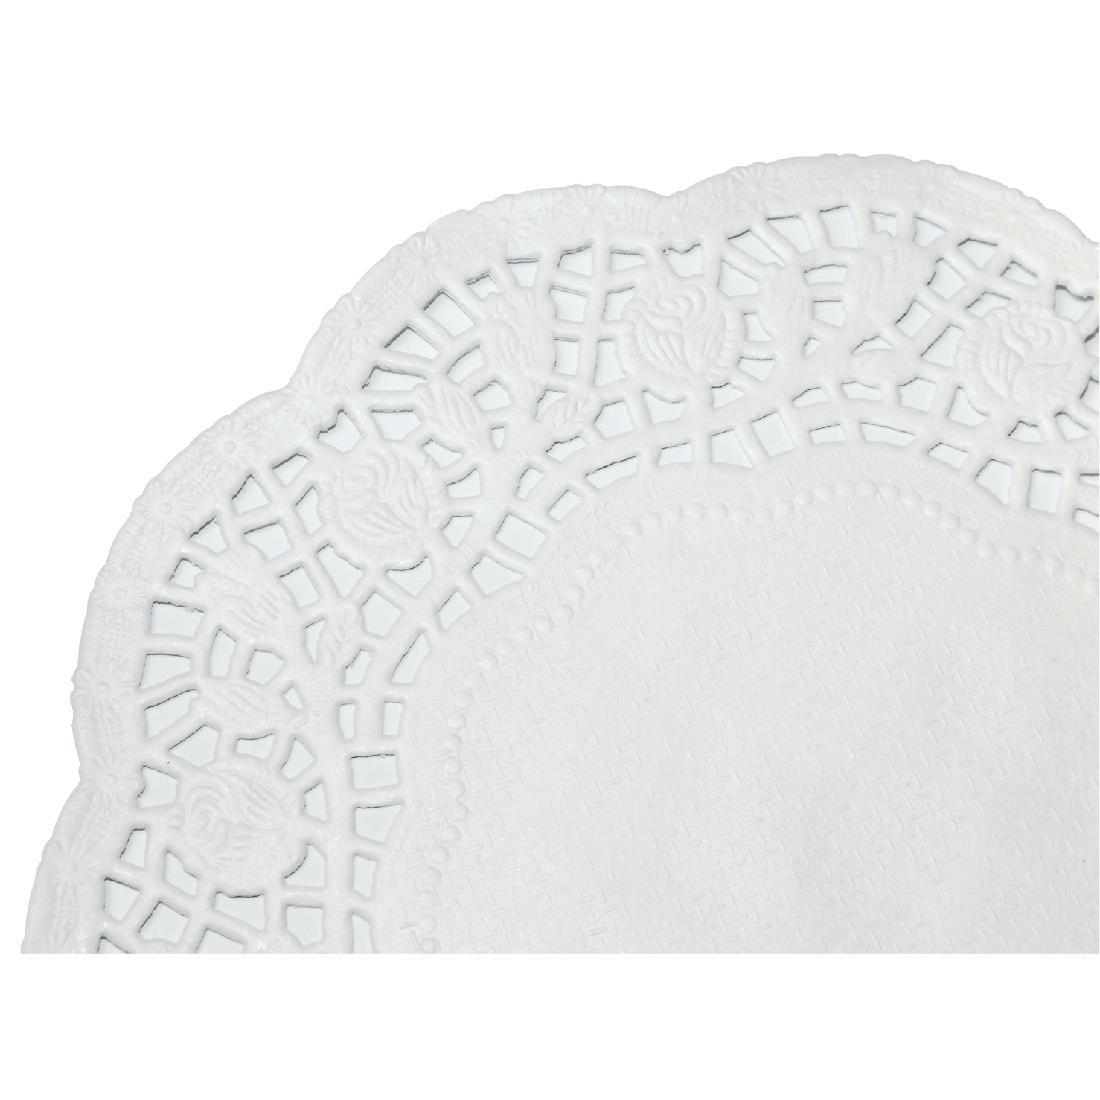 Fiesta Round Paper Doilies 240mm (Pack of 250) - CE992  - 3